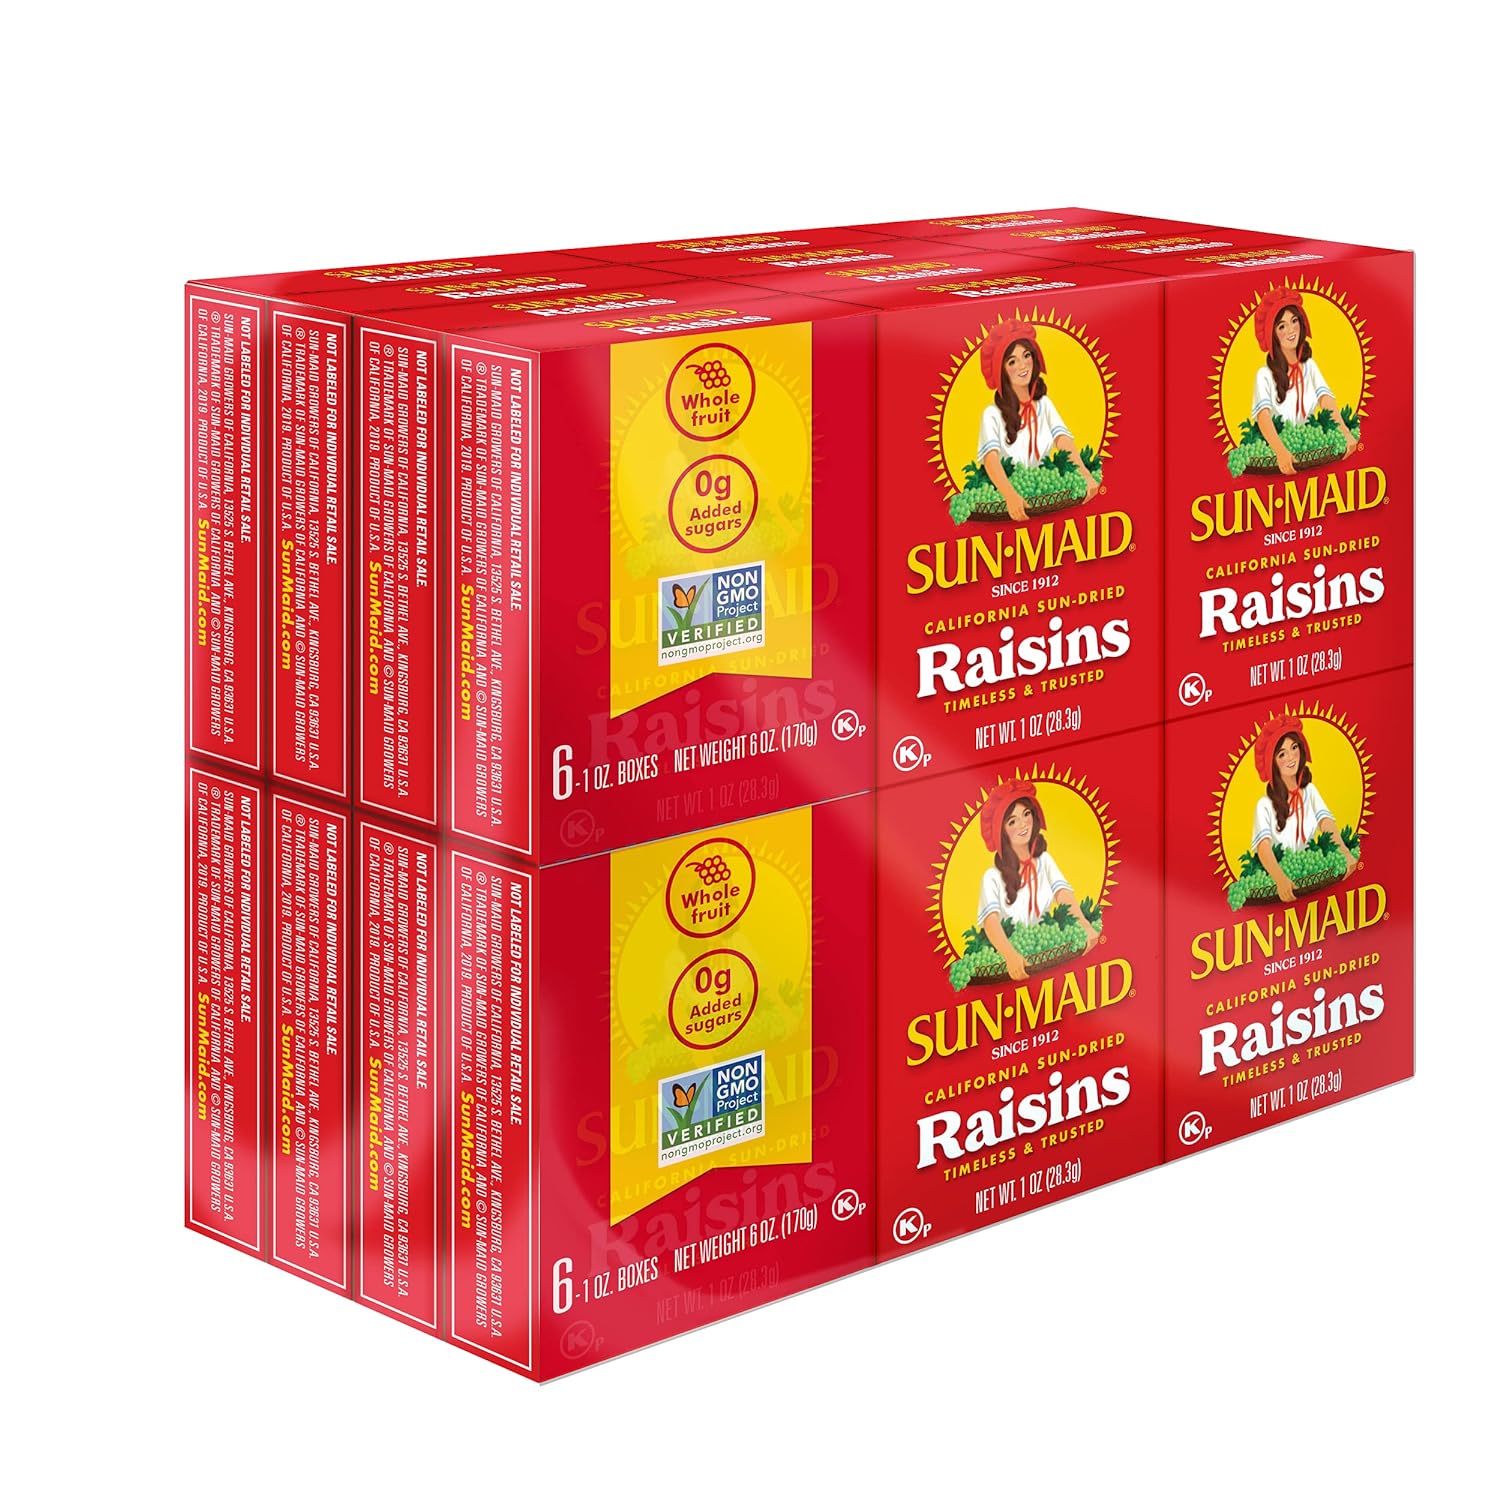 Sun-Maid California Sun-Dried Raisins - (24 Pack) 1 oz Snack-Size Box - Dried Fruit Snack for Lunches, Snacks, and Natural Sweeteners